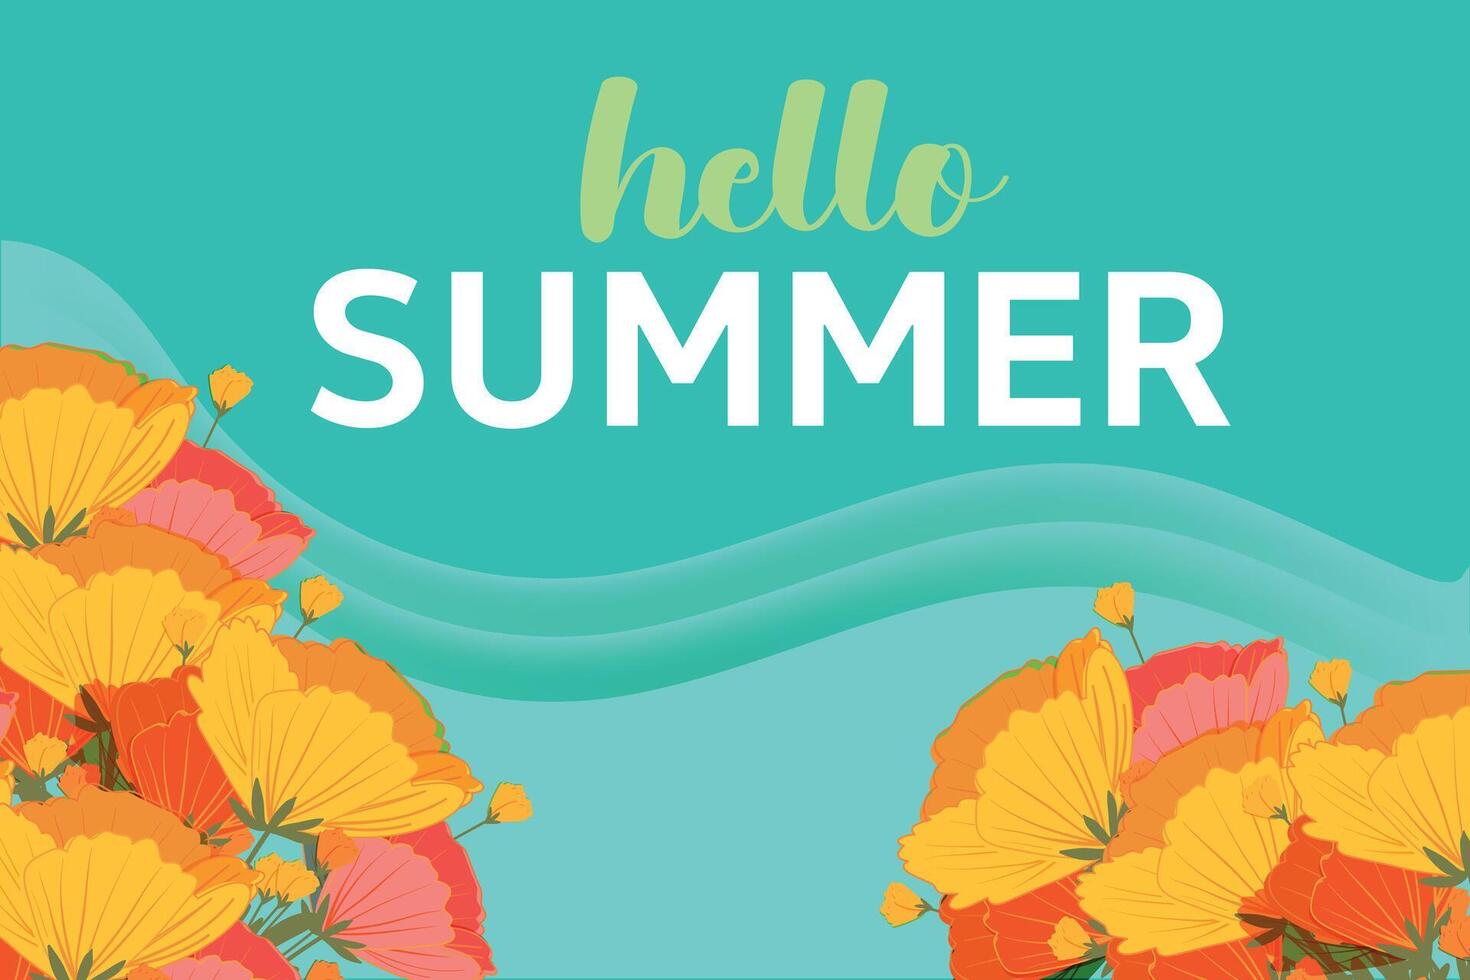 Hello Summer Vector horizontal summer banner. Floral green background. Hand drawn Floral art template for banner, posters decor and greetings